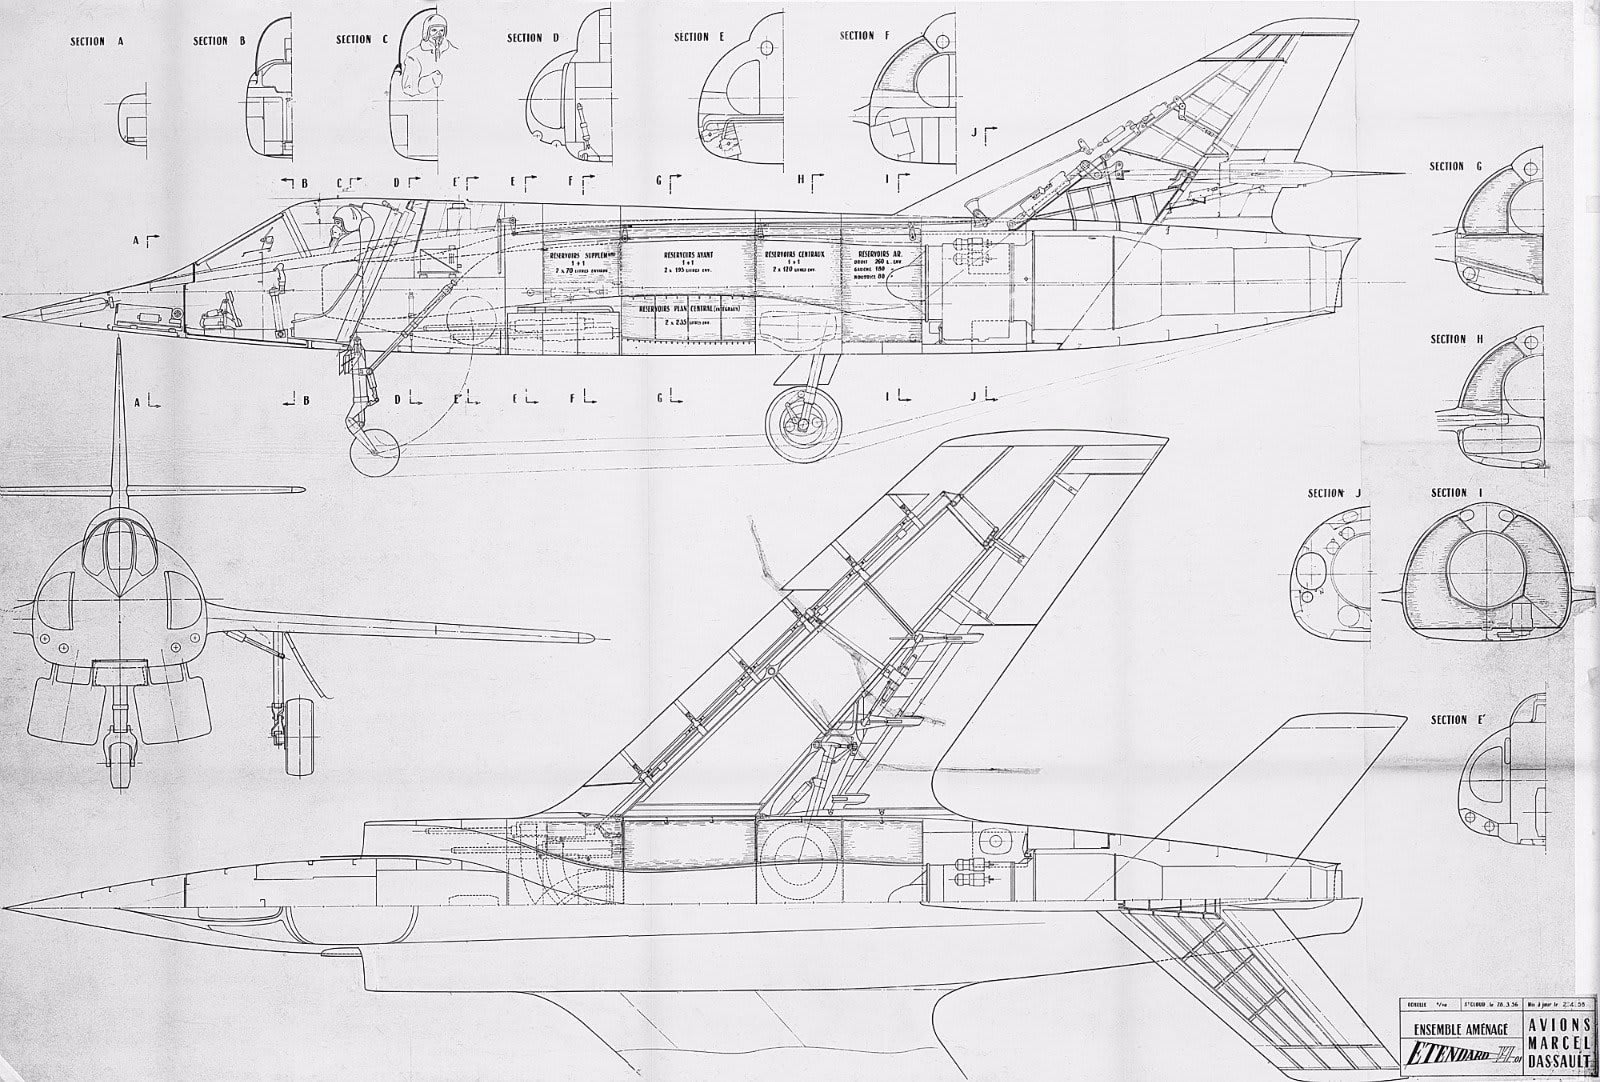 3 view drawings of a selection of Dassault Aviation aircraft